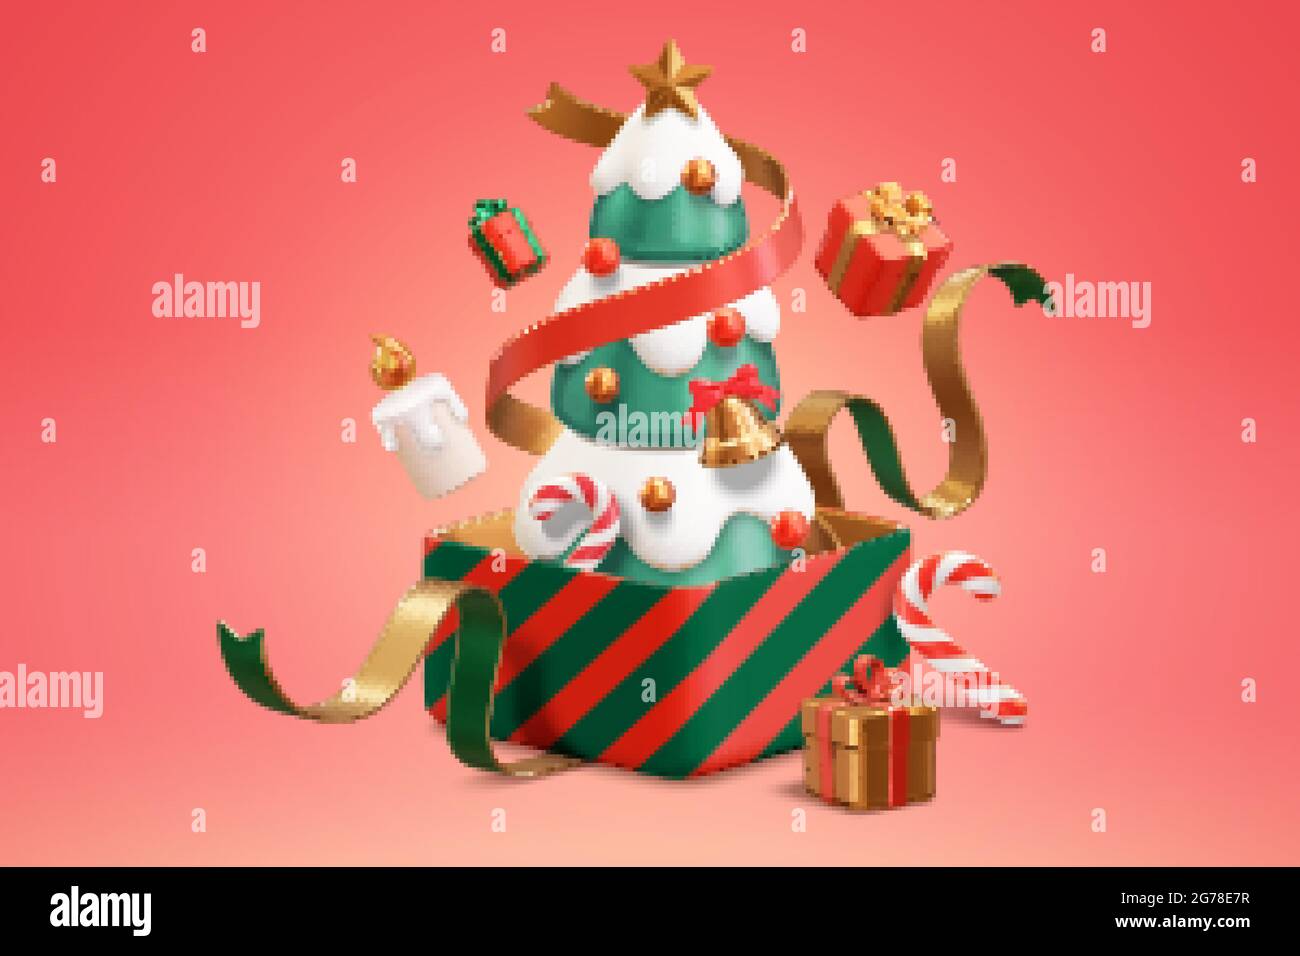 3d Xmas tree in an unboxed gift. Illustration of Christmas tree in an opened box with ribbons, floating candle, and more unwrapped presents showing up Stock Vector